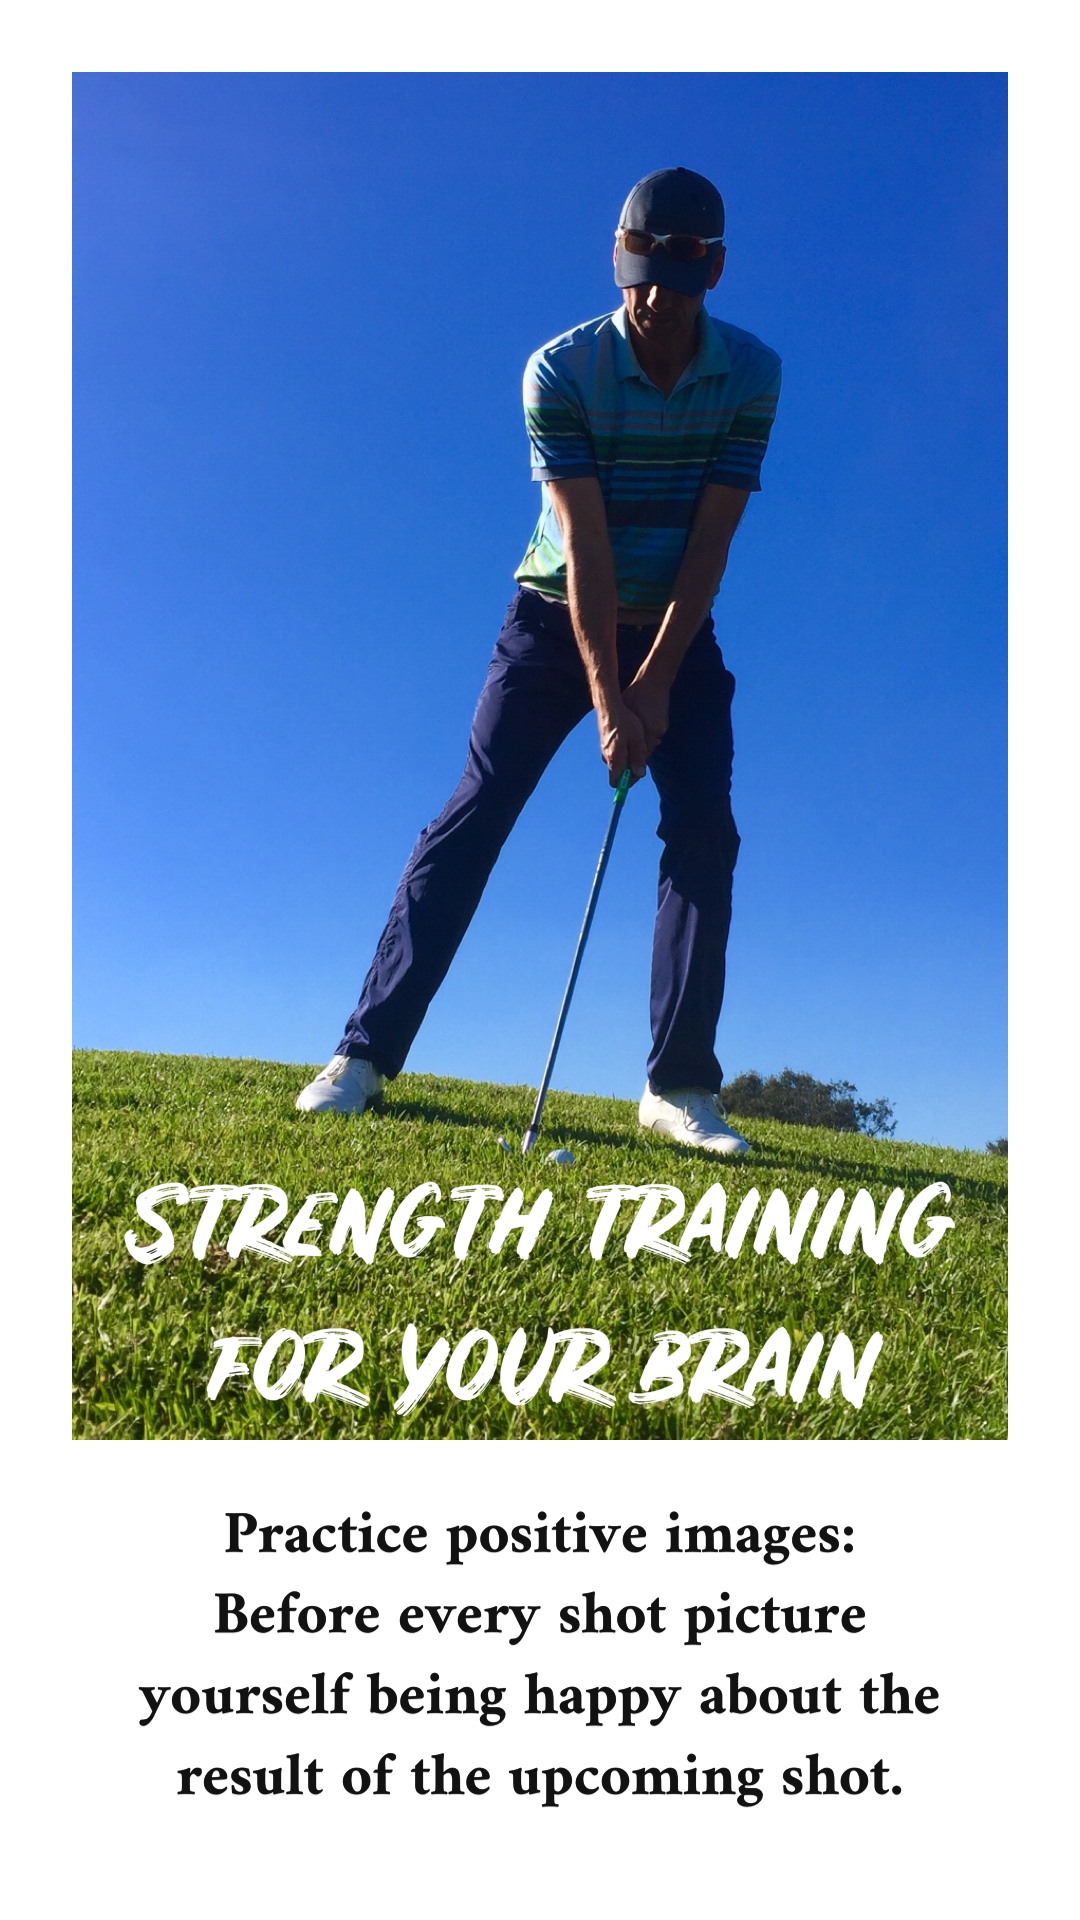 Golf School in Majorca/Spain – Golf courses and playing lessons | Social  Media Post Addition: How to improve your Self-Talk in Golf - Golf School in  Majorca/Spain - Golf courses and playing